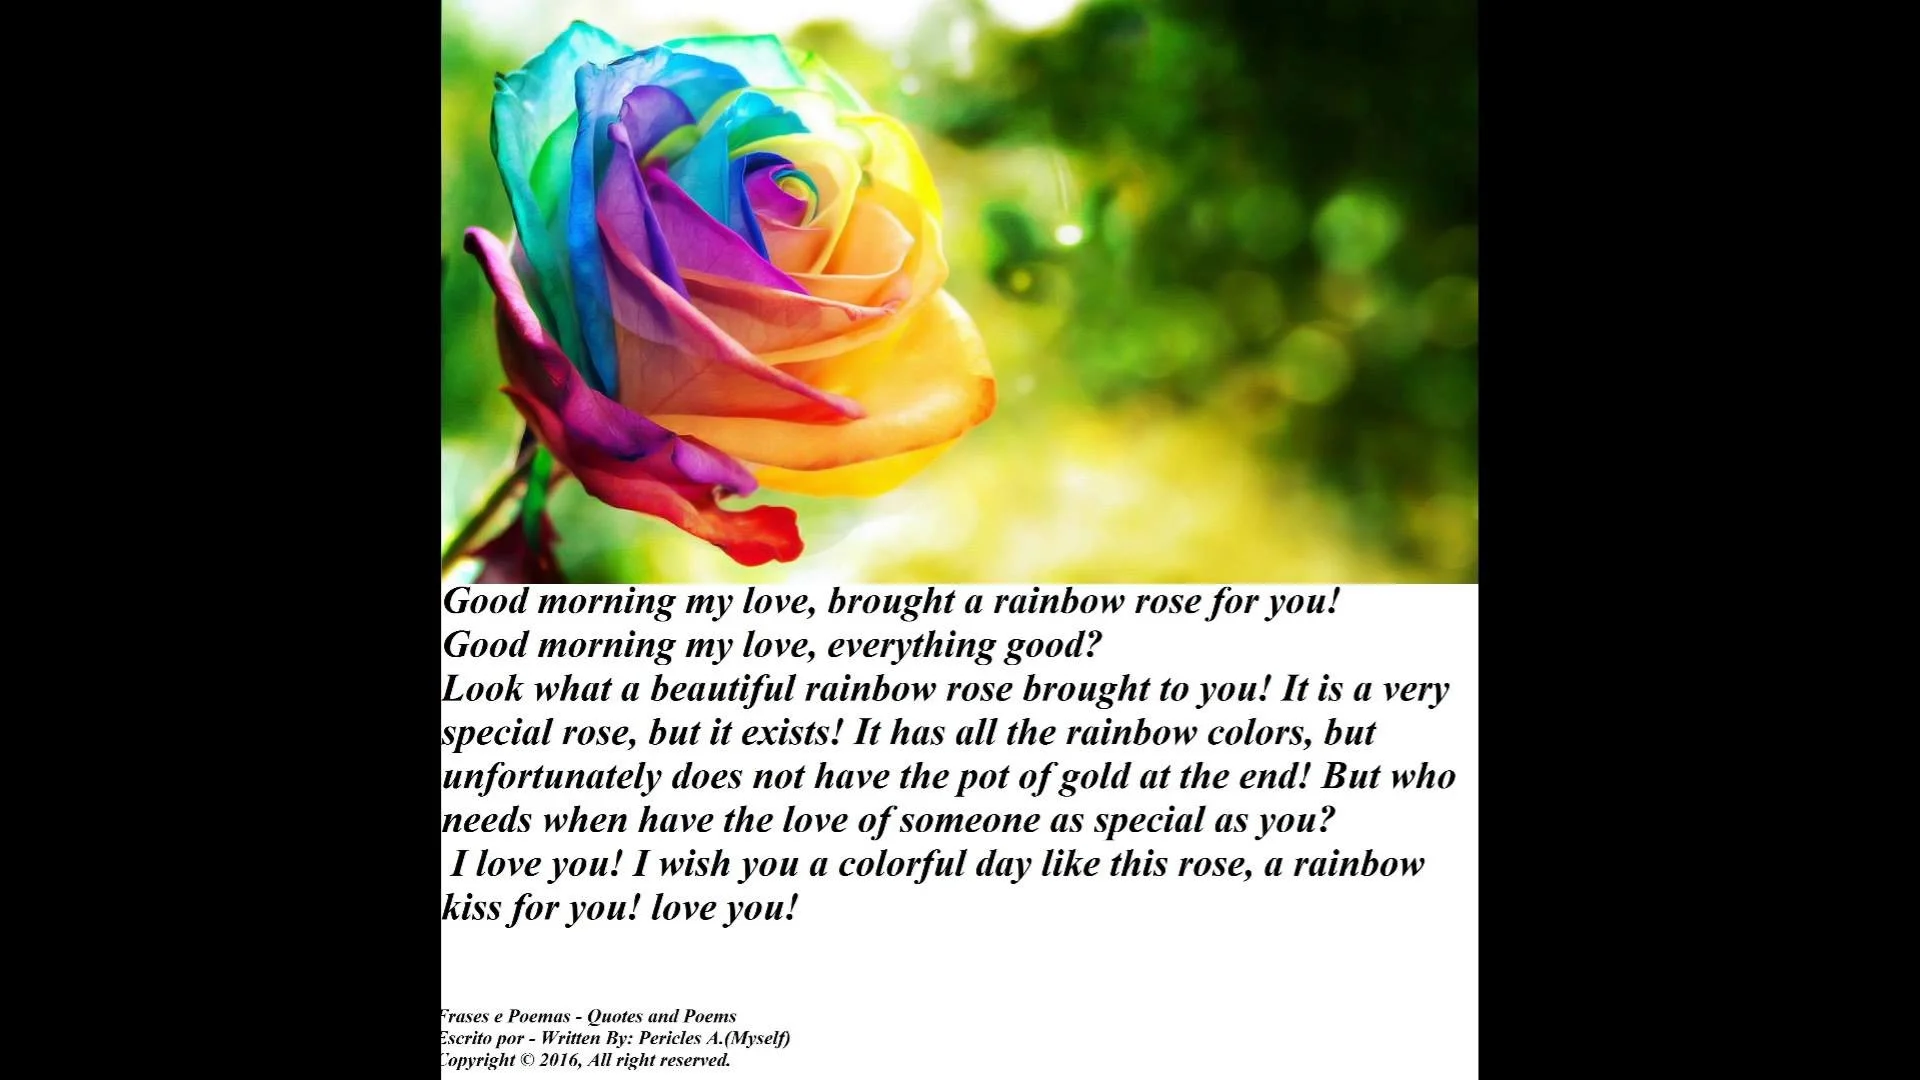 Good morning my love, brought a rainbow rose, love you! [Message] [Quotes  and Poems]